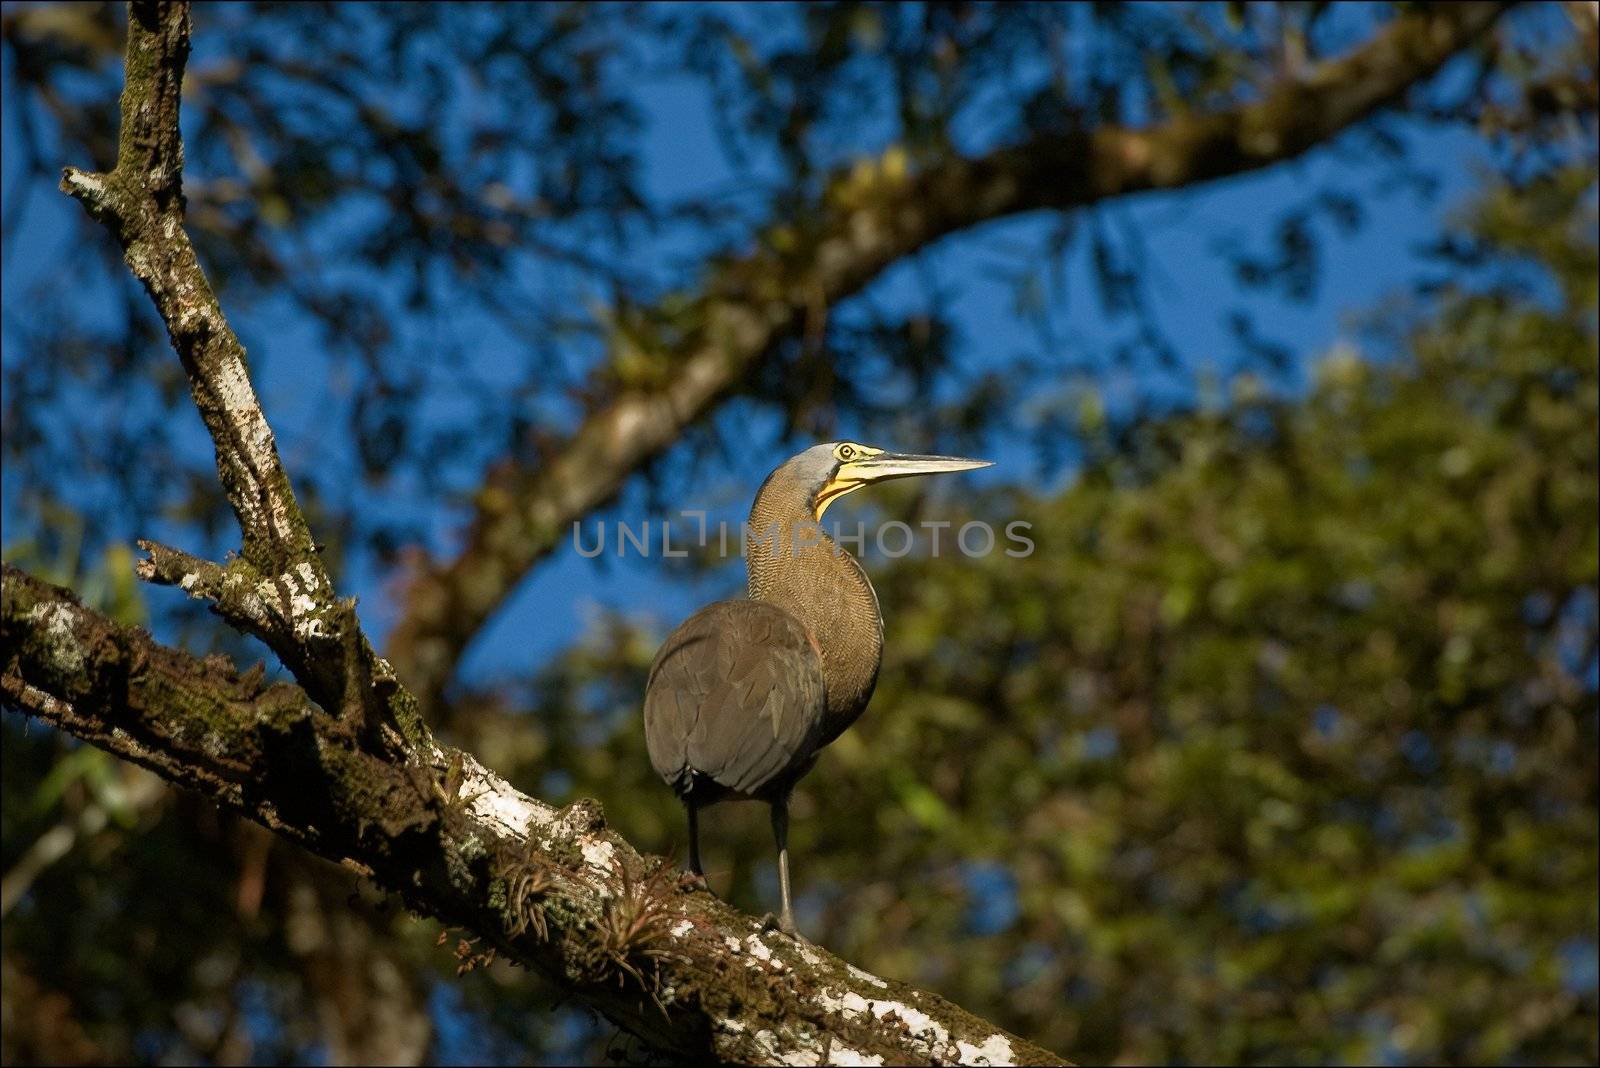 The Bare-throated Tiger Heron, Tigrisoma mexicanum, is a wading bird of the heron family Ardeidae,